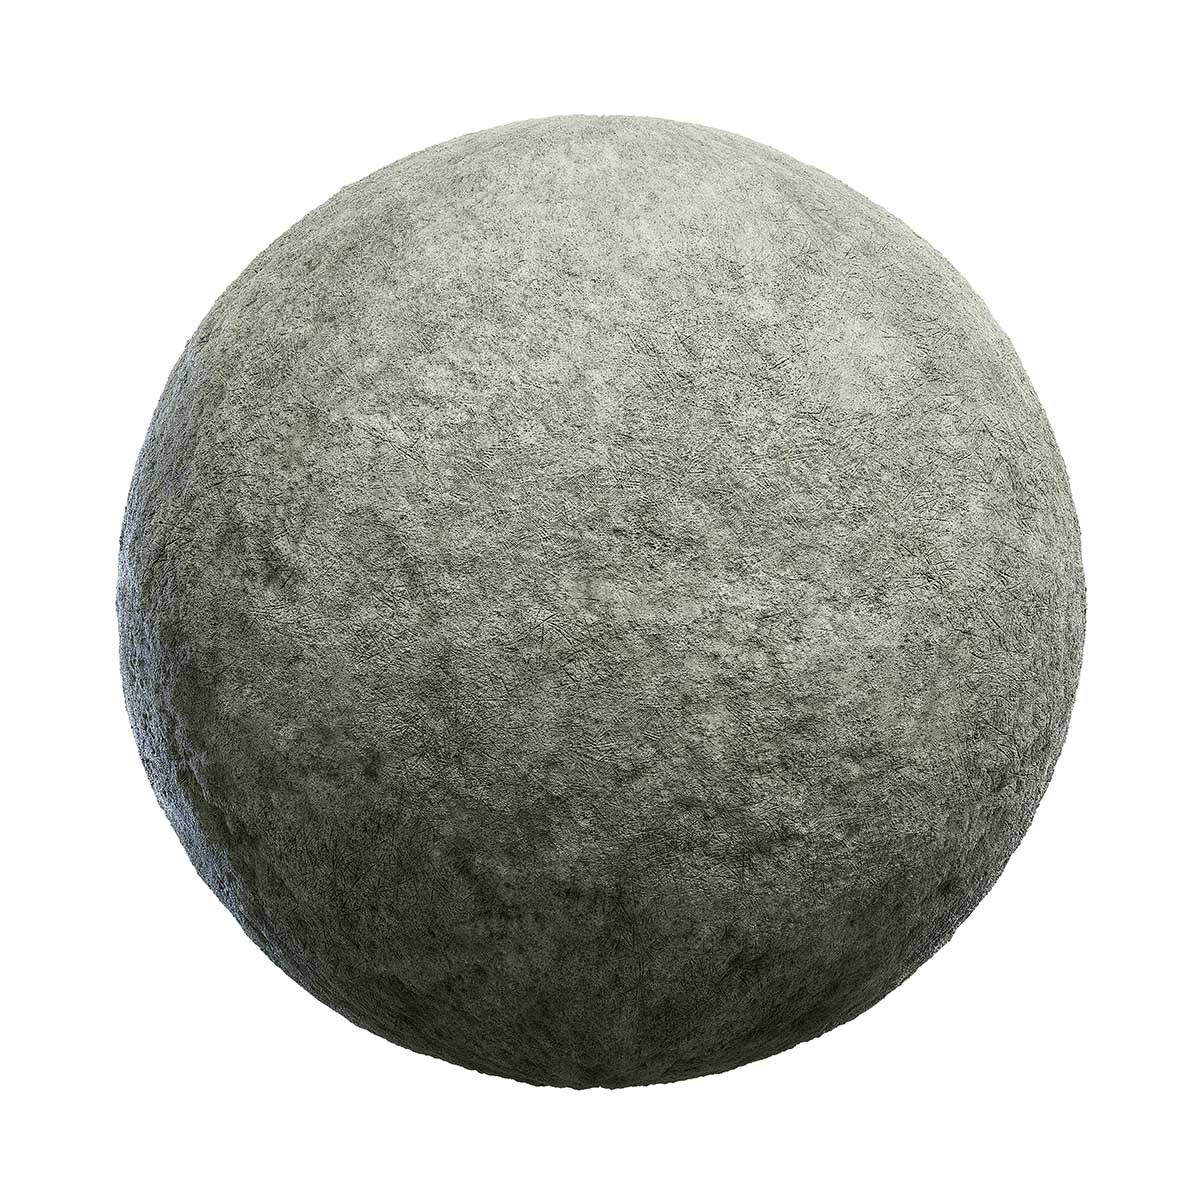 Grey Scratched Clay Ground PBR Texture